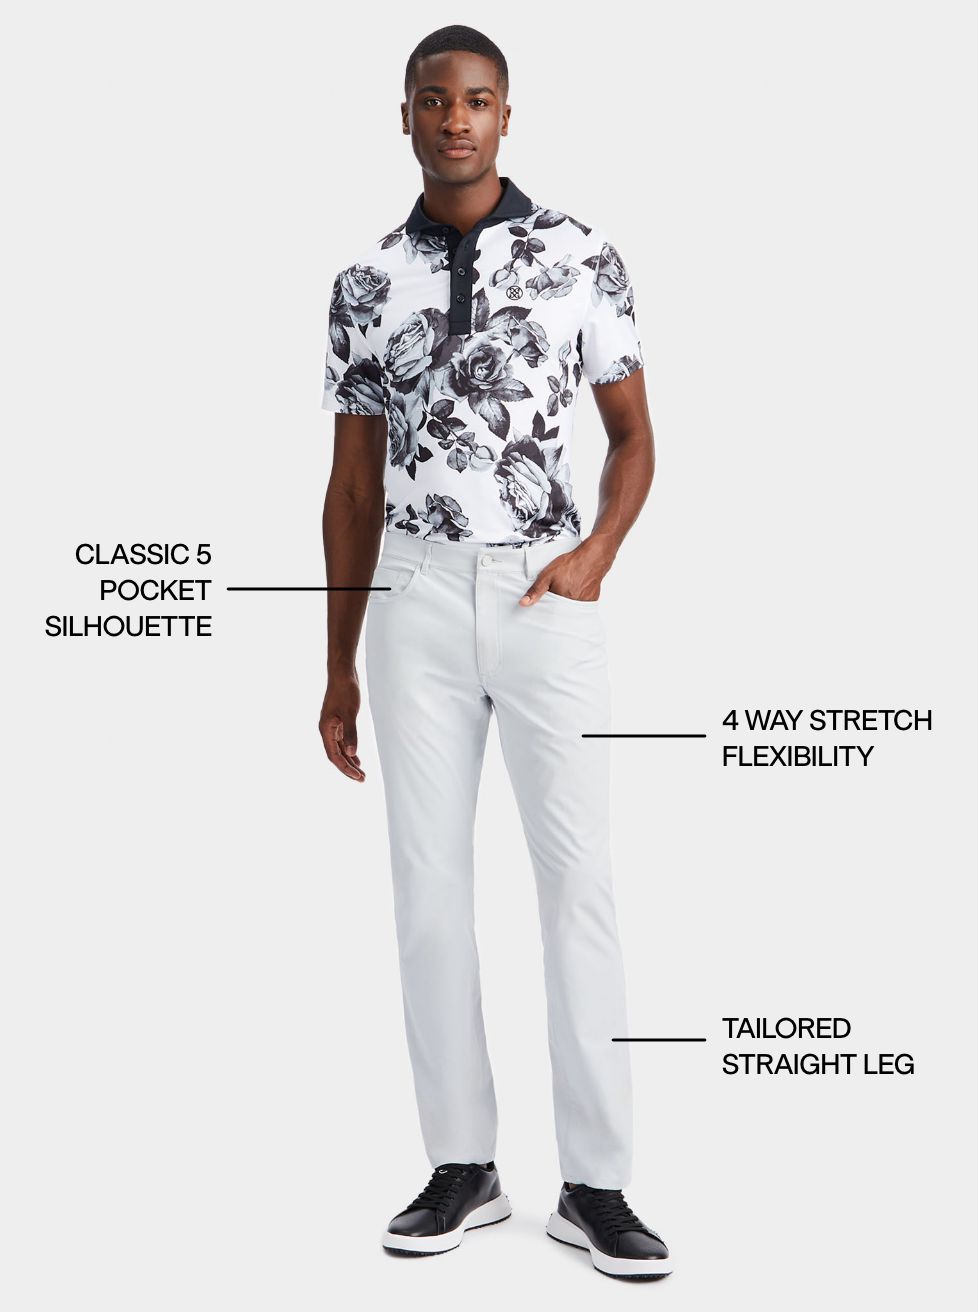 The Men's Pant Guide – G/FORE